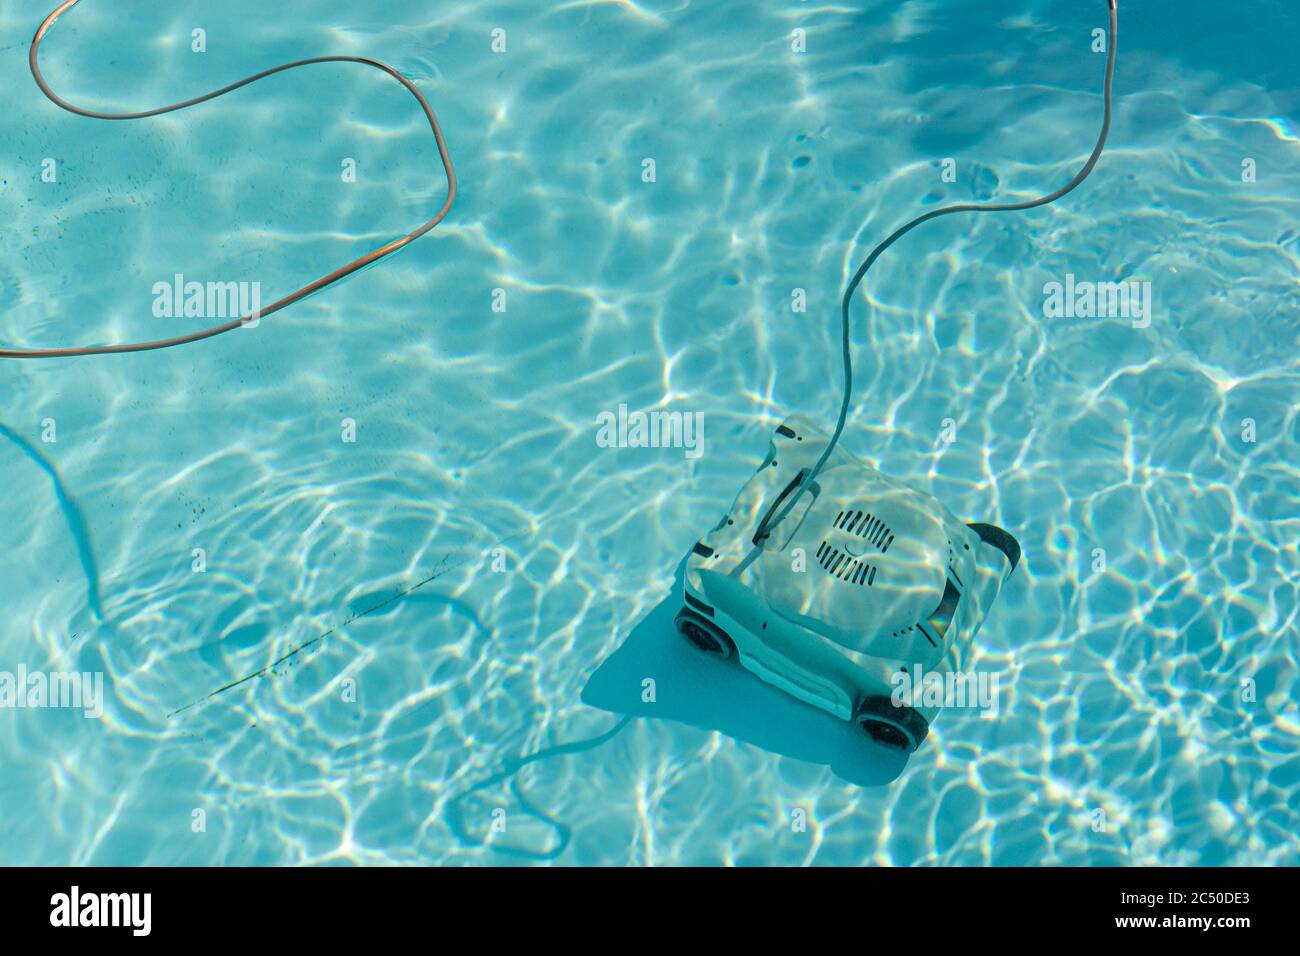 Automatic robotic pool vacuum cleaner under water cleaning the floor. Stock Photo